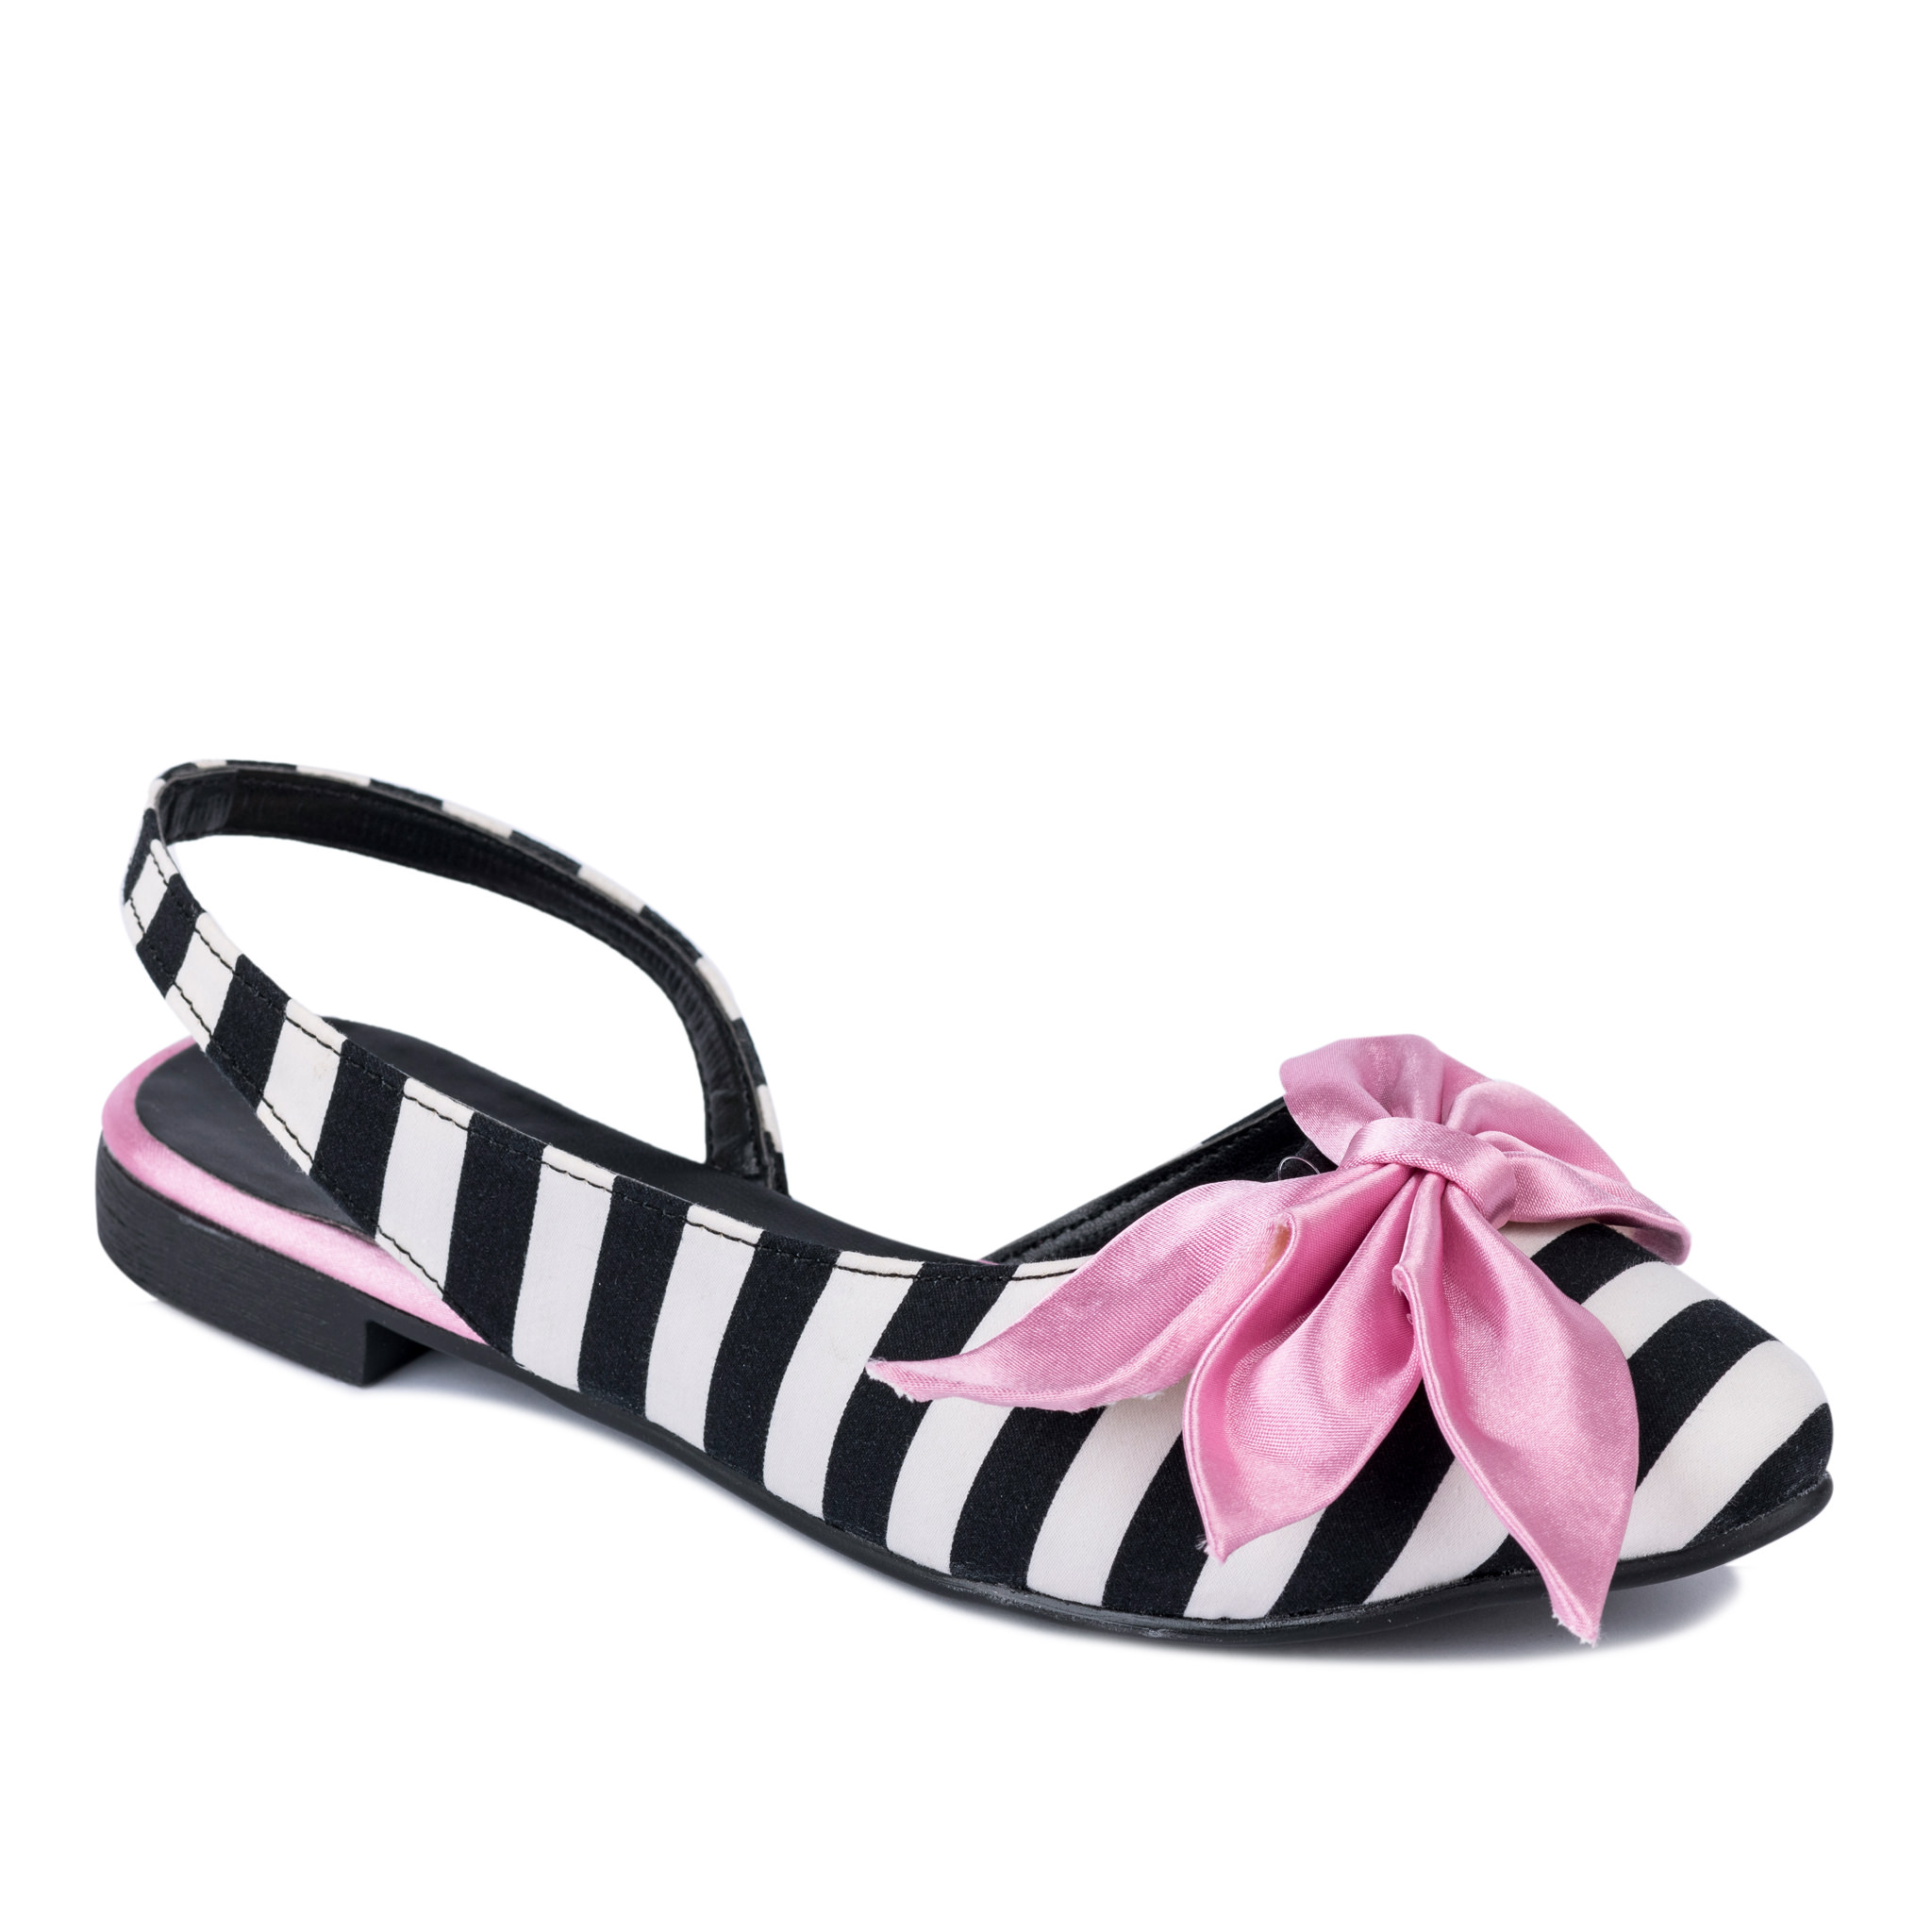 STRIPED FLATS WITH ROSE BOW - BLACK/WHITE